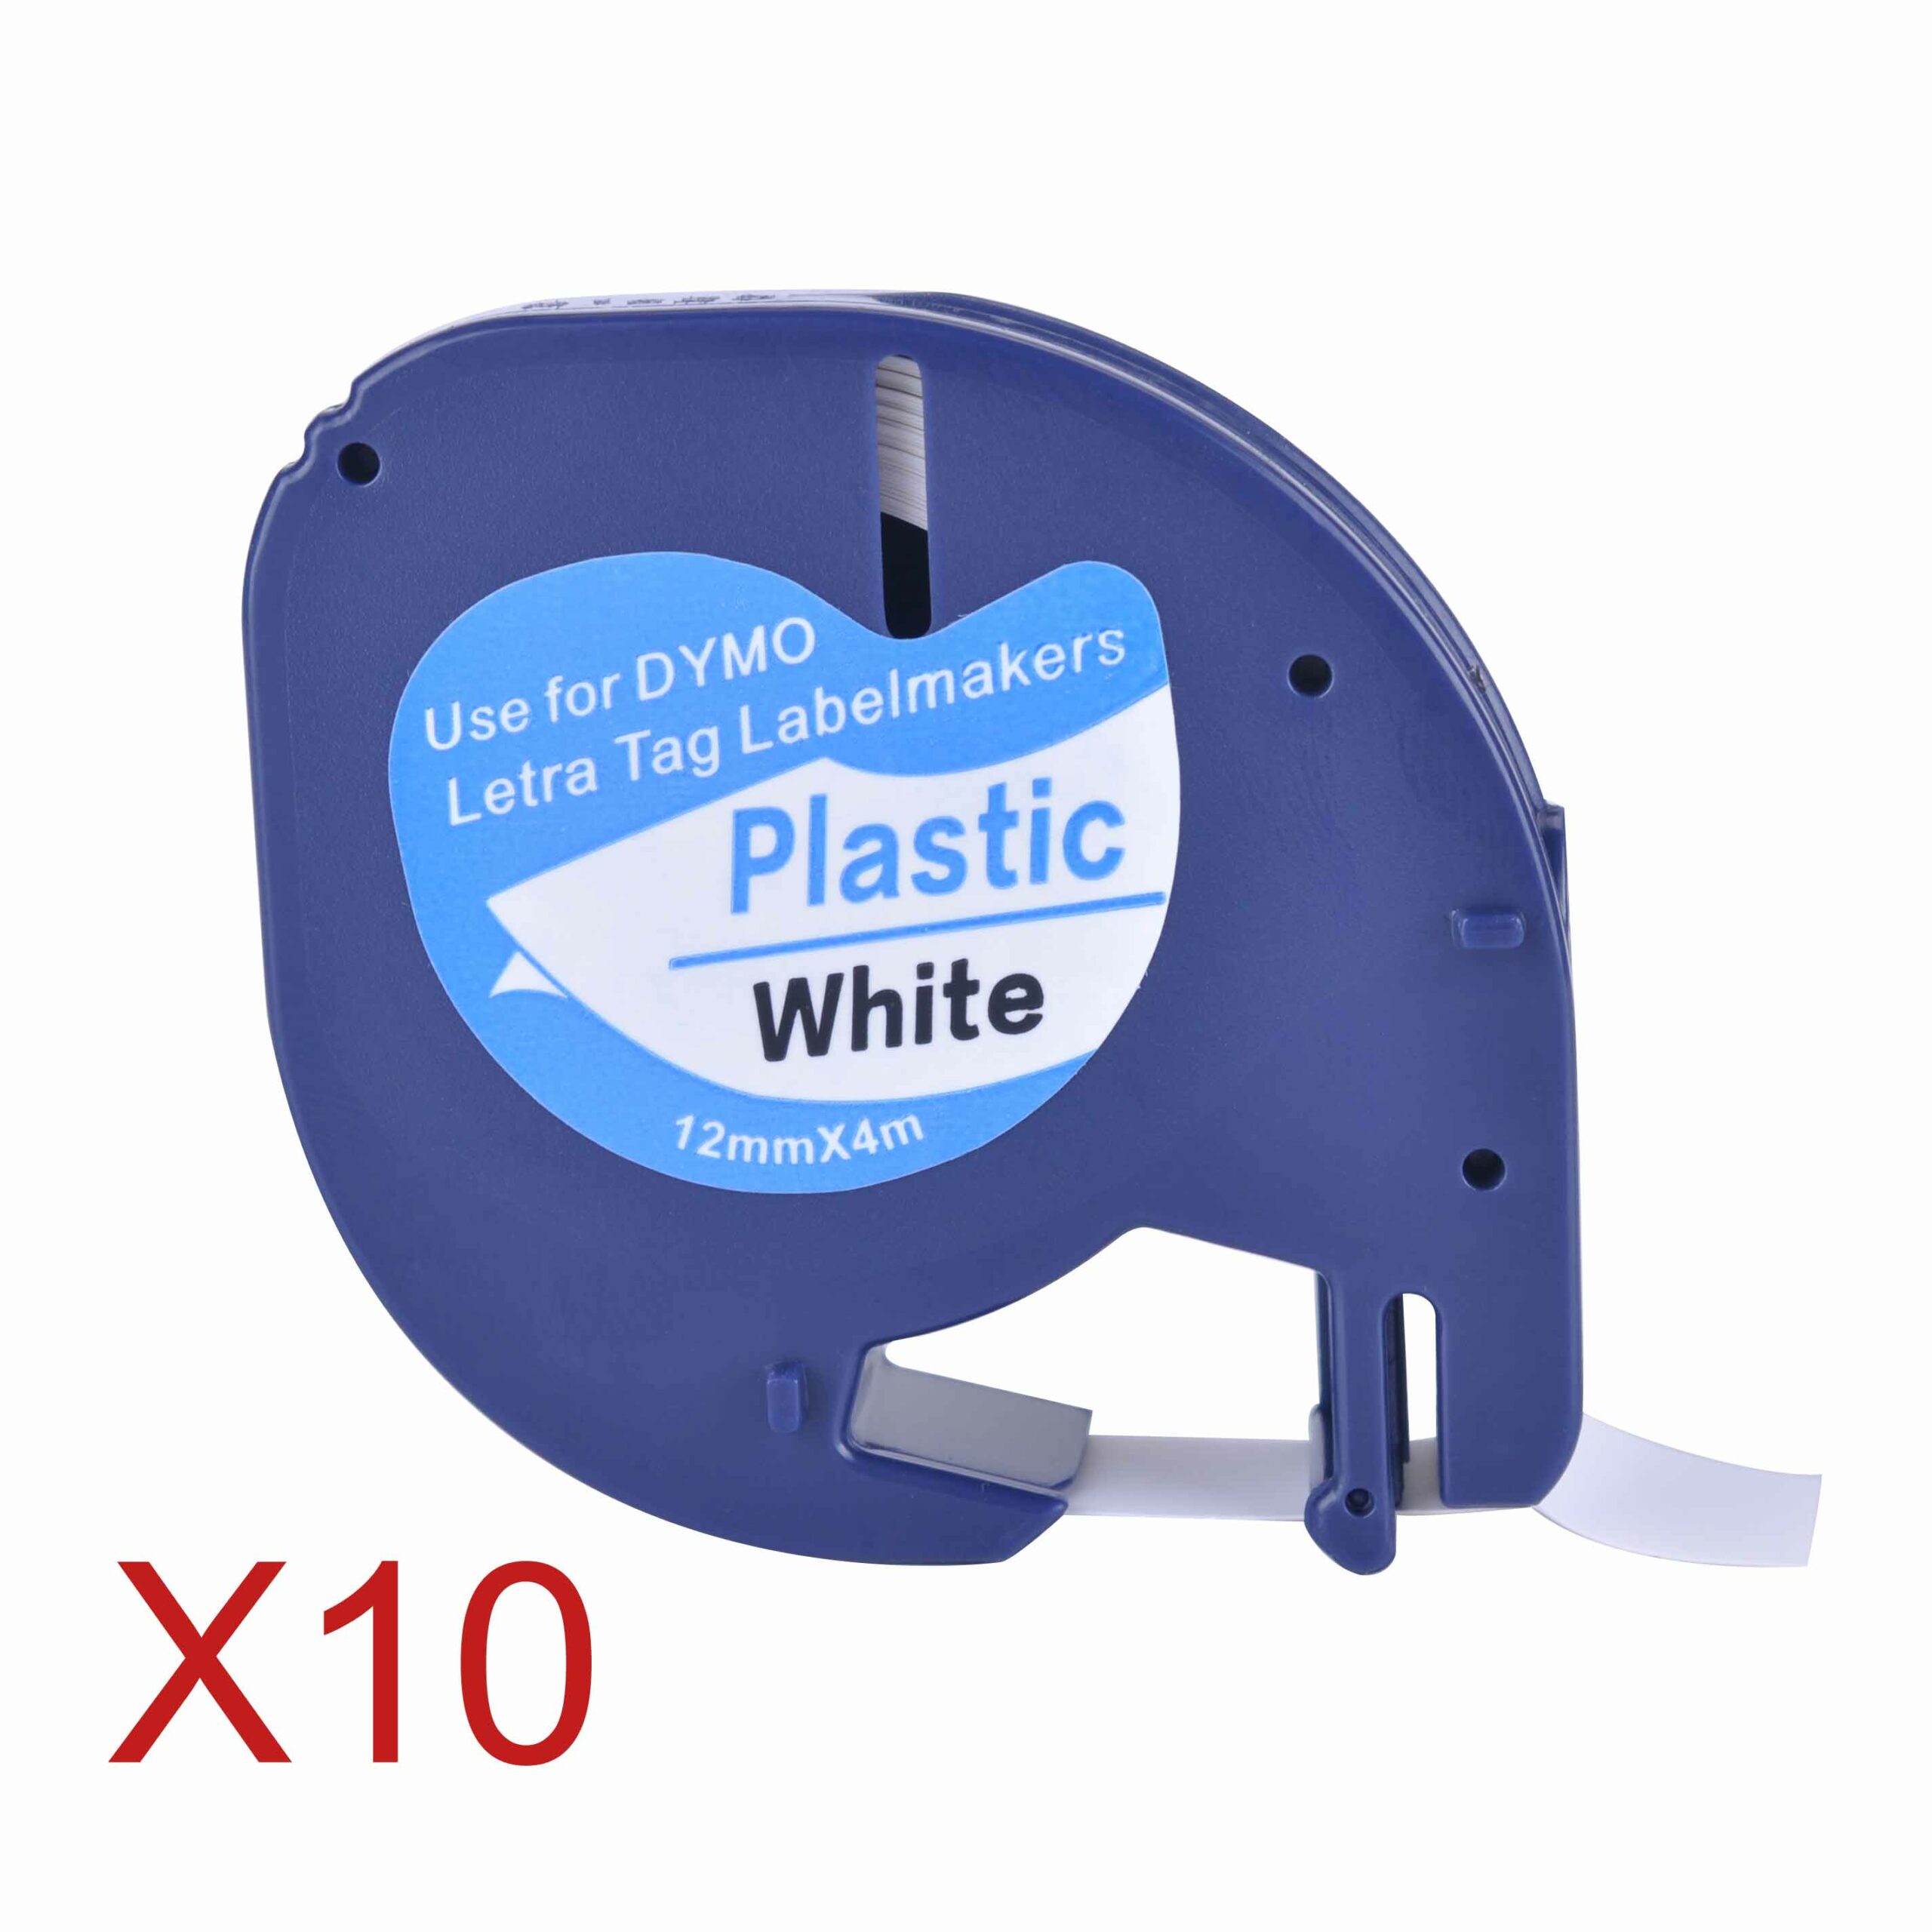 10 Compatible Dymo LetraTag 91201 Black on White 12mm x 4m Plastic Label Tapes 91201 91221 scaled